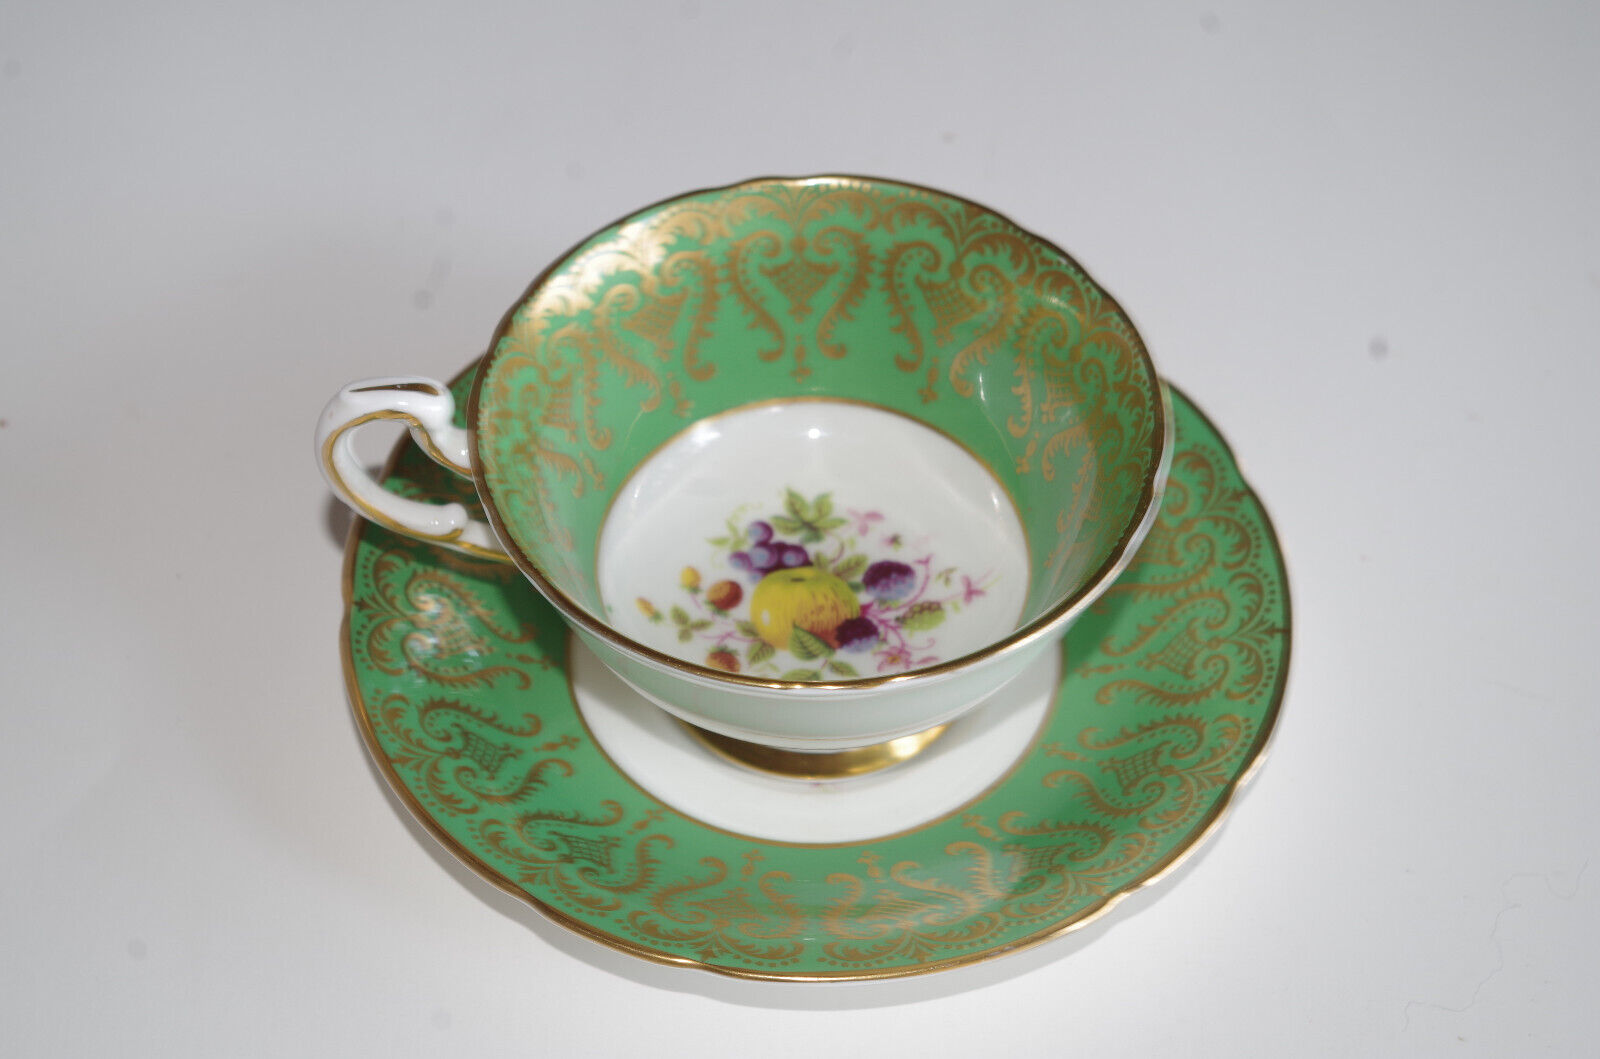 Vintage Paragon Bone China Teacup and Saucer Lime Green And Gold Fruit Pattern